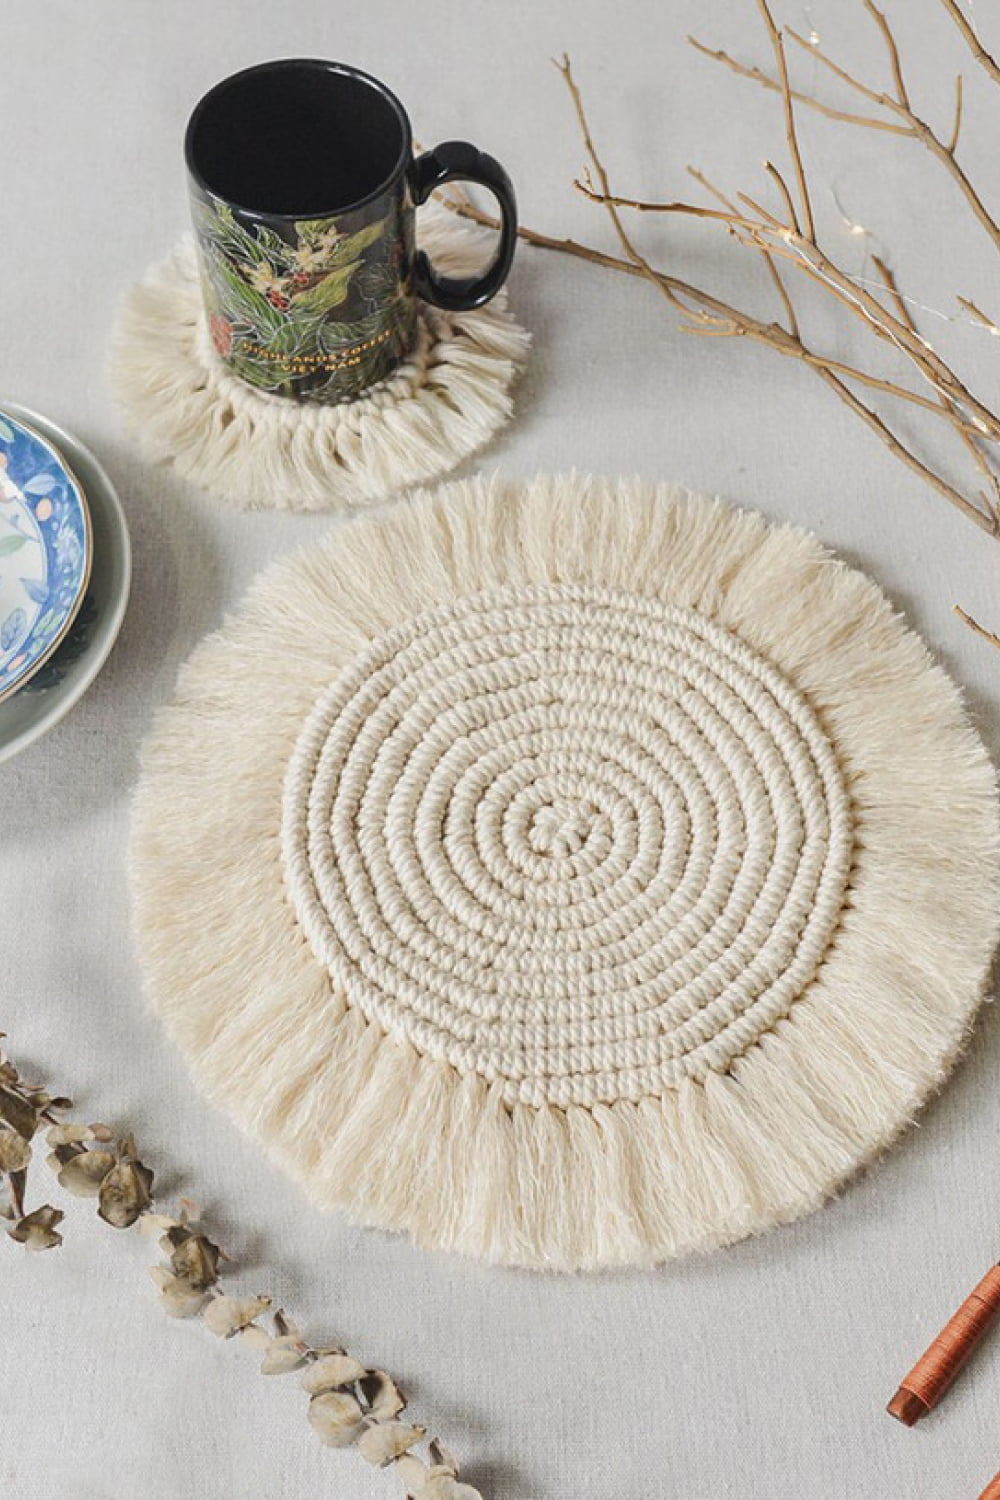 Gray 11.8" Macrame Round Cup Mat Sentient Beauty Fashions Home Decor